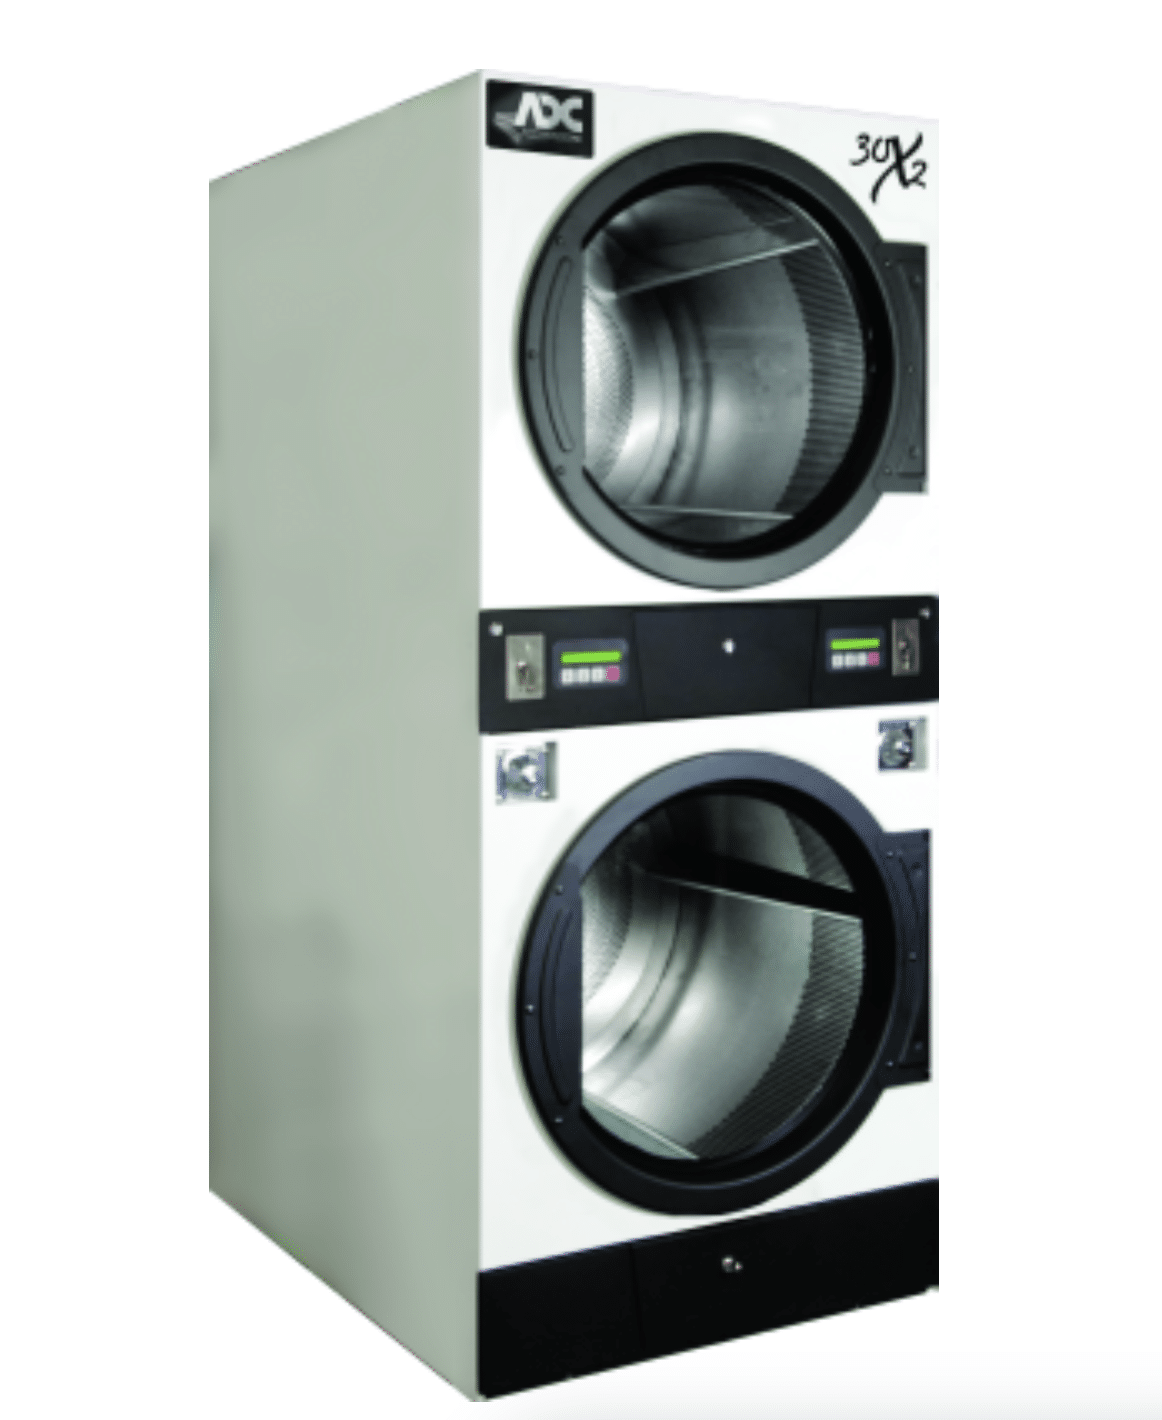 Whirlpool Recalls 2,500 ADC Commercial Dryers for Fire Hazard